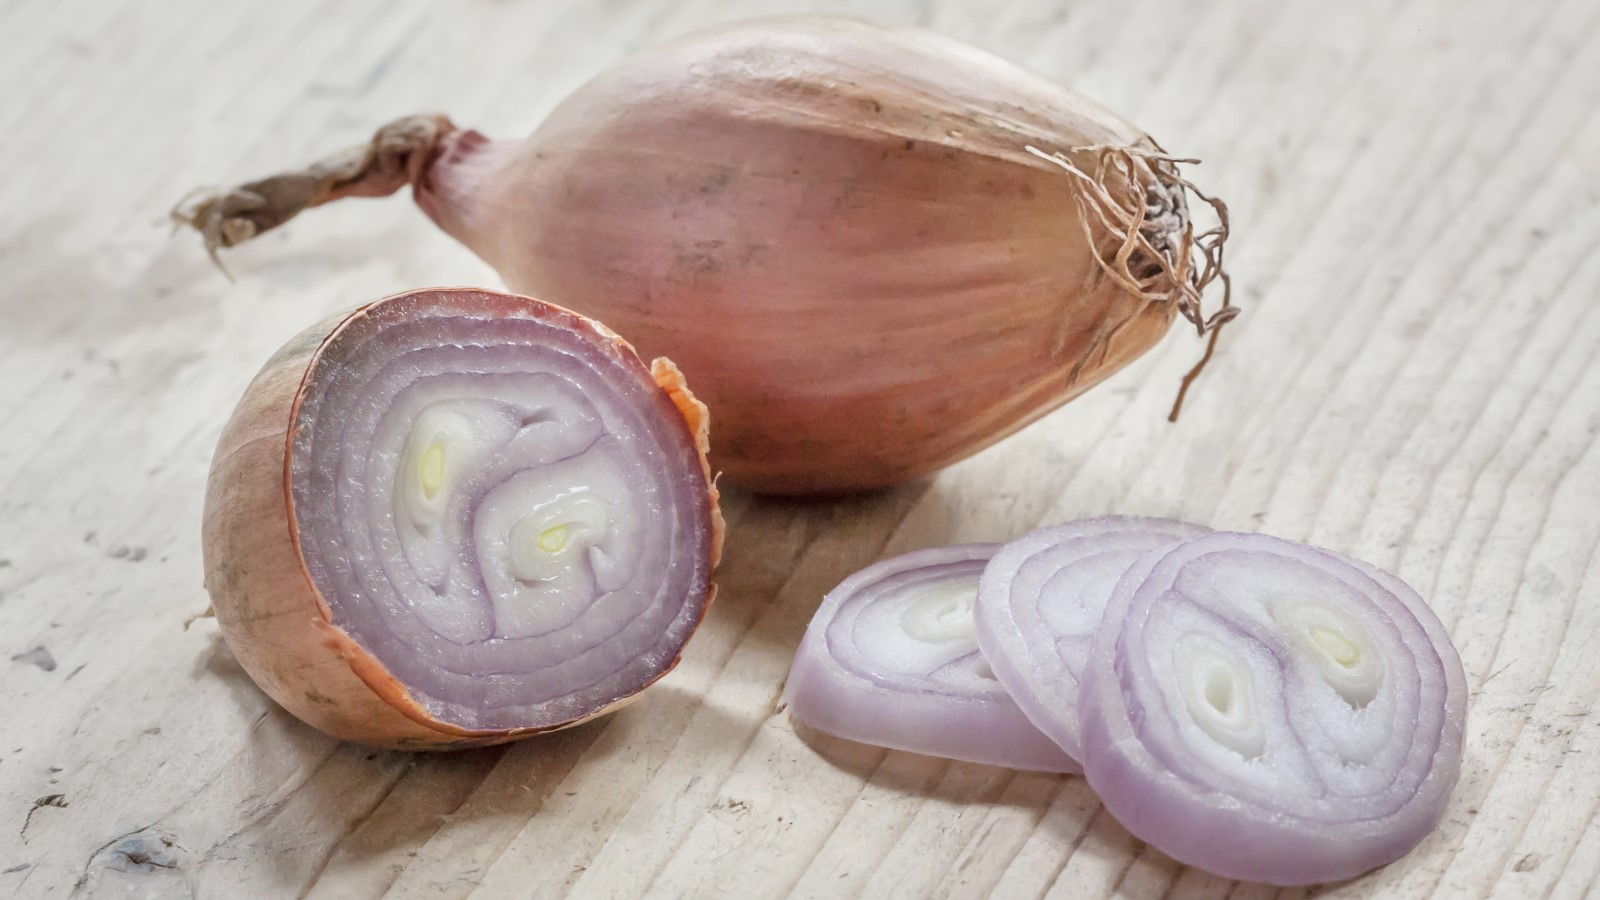 When and How to Harvest Shallots